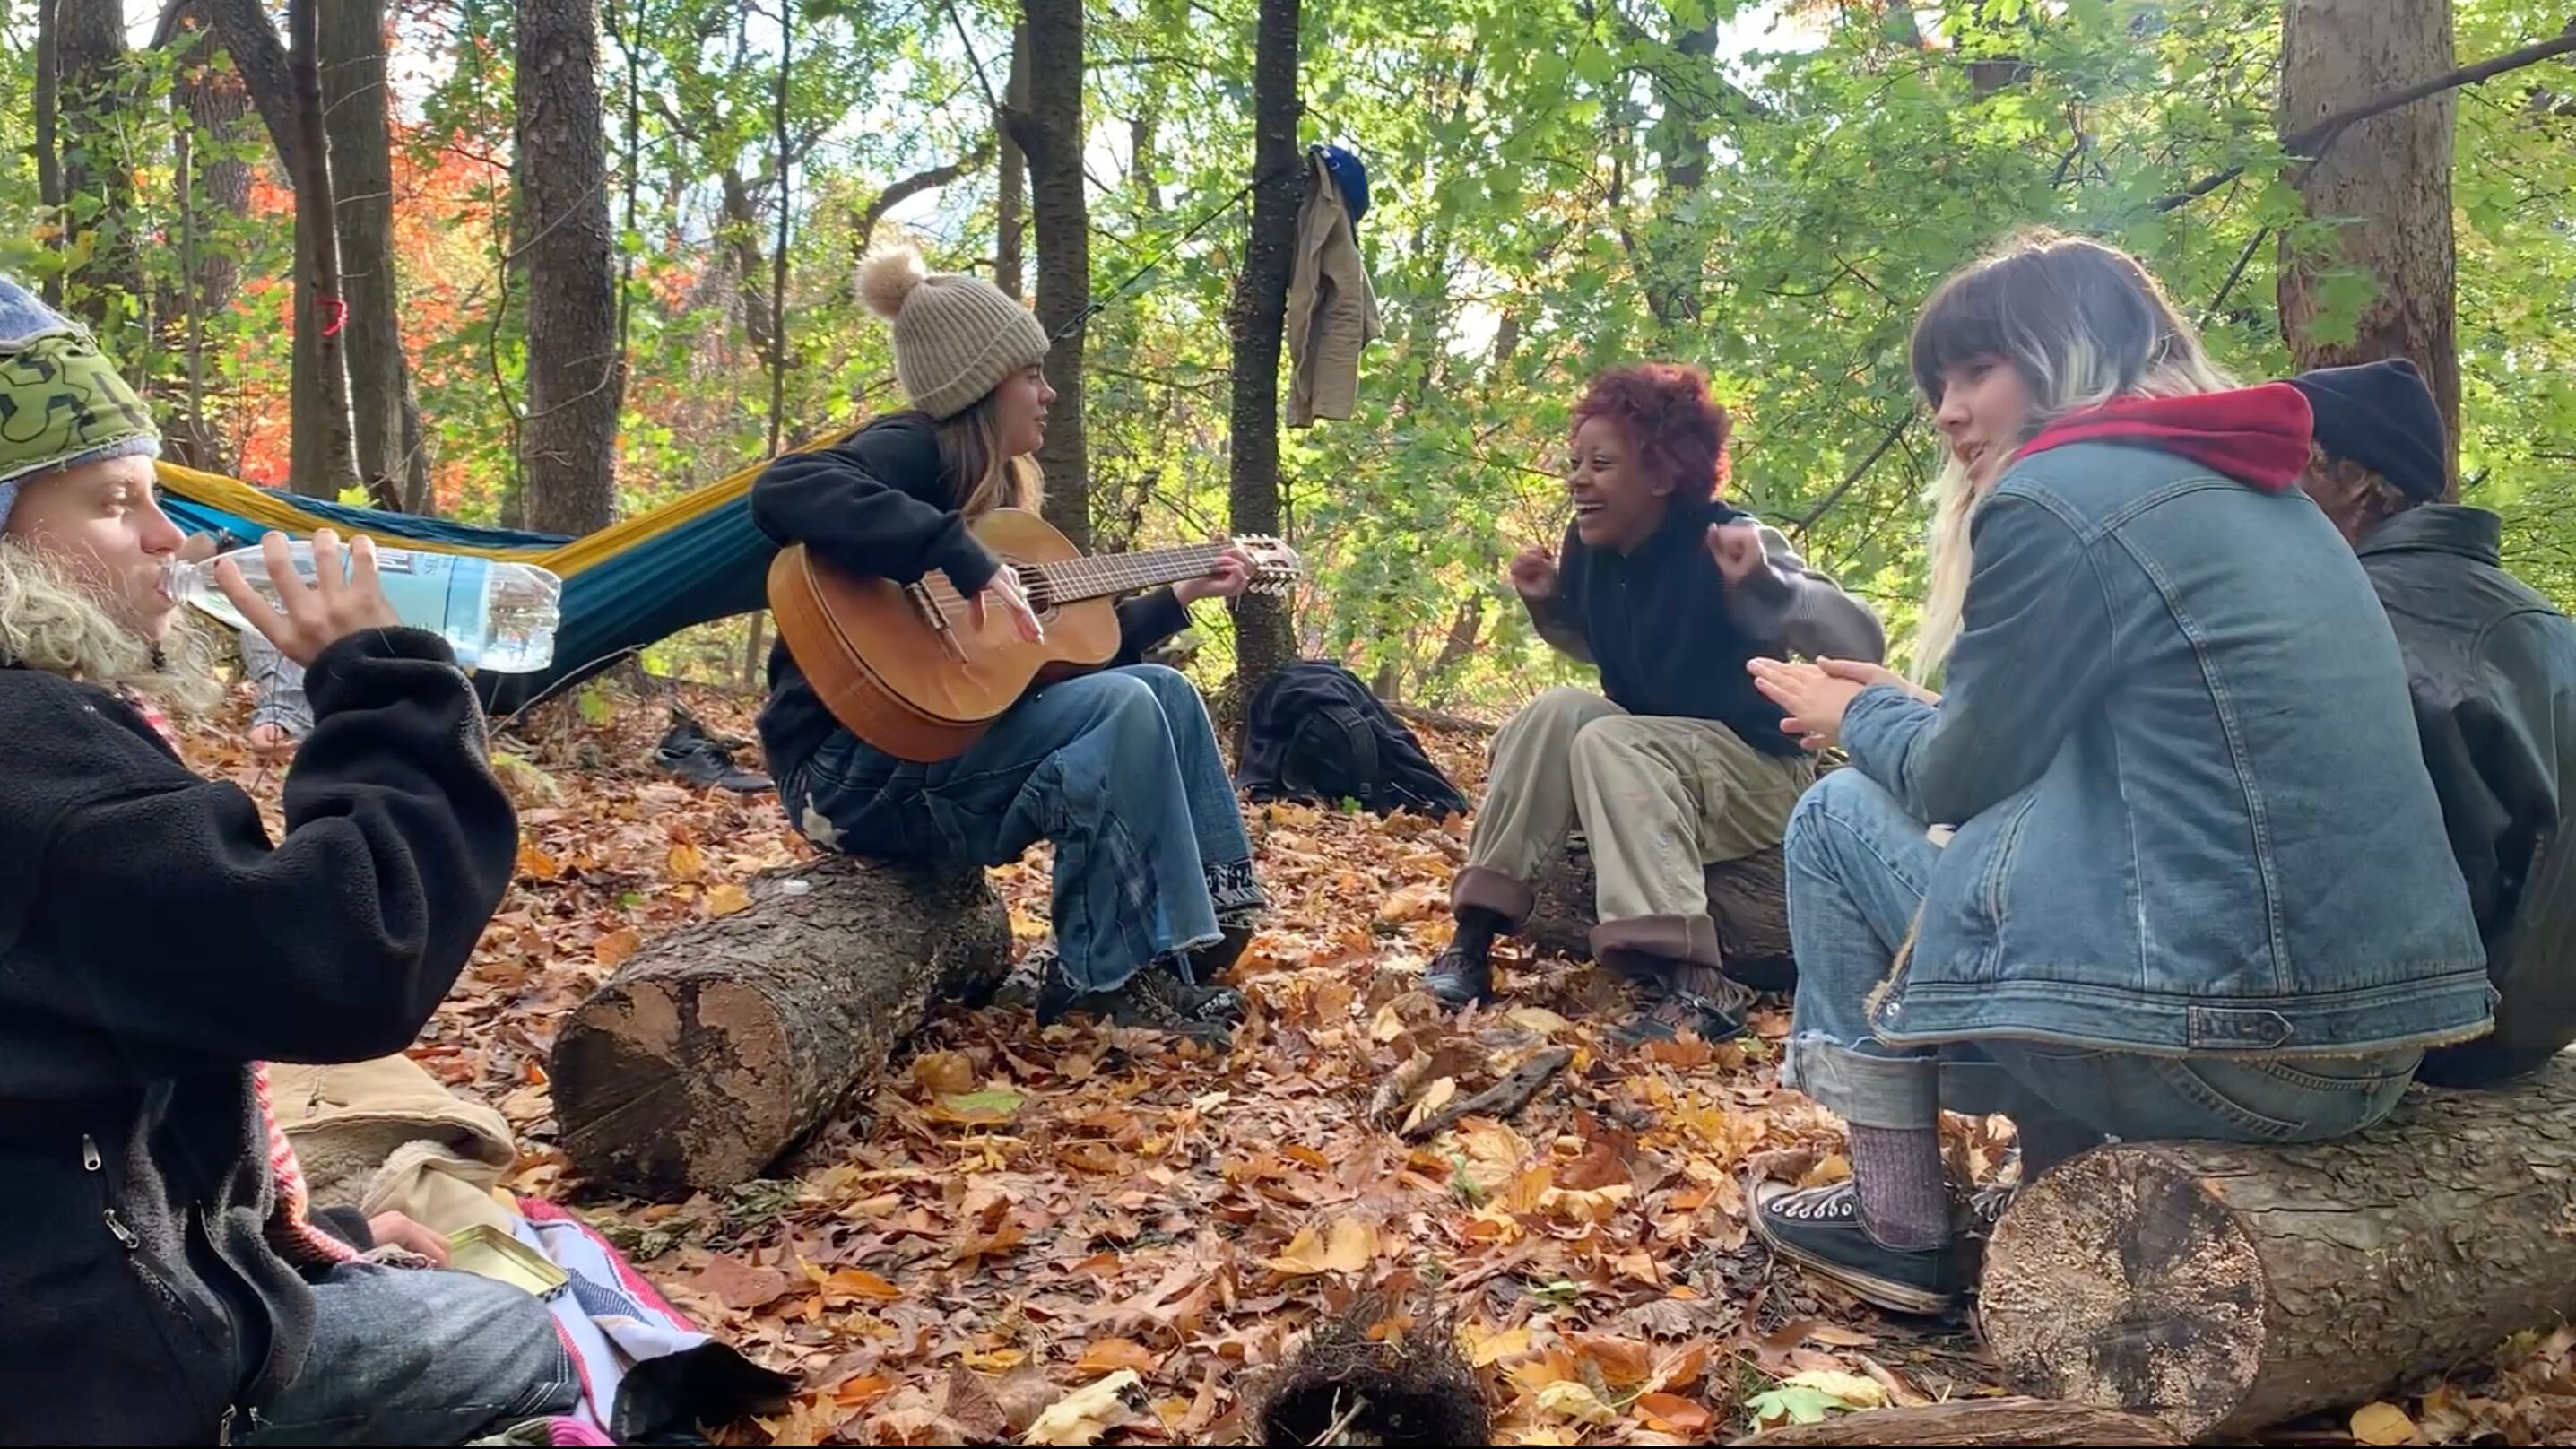 A group of teens in a park with a guitar.